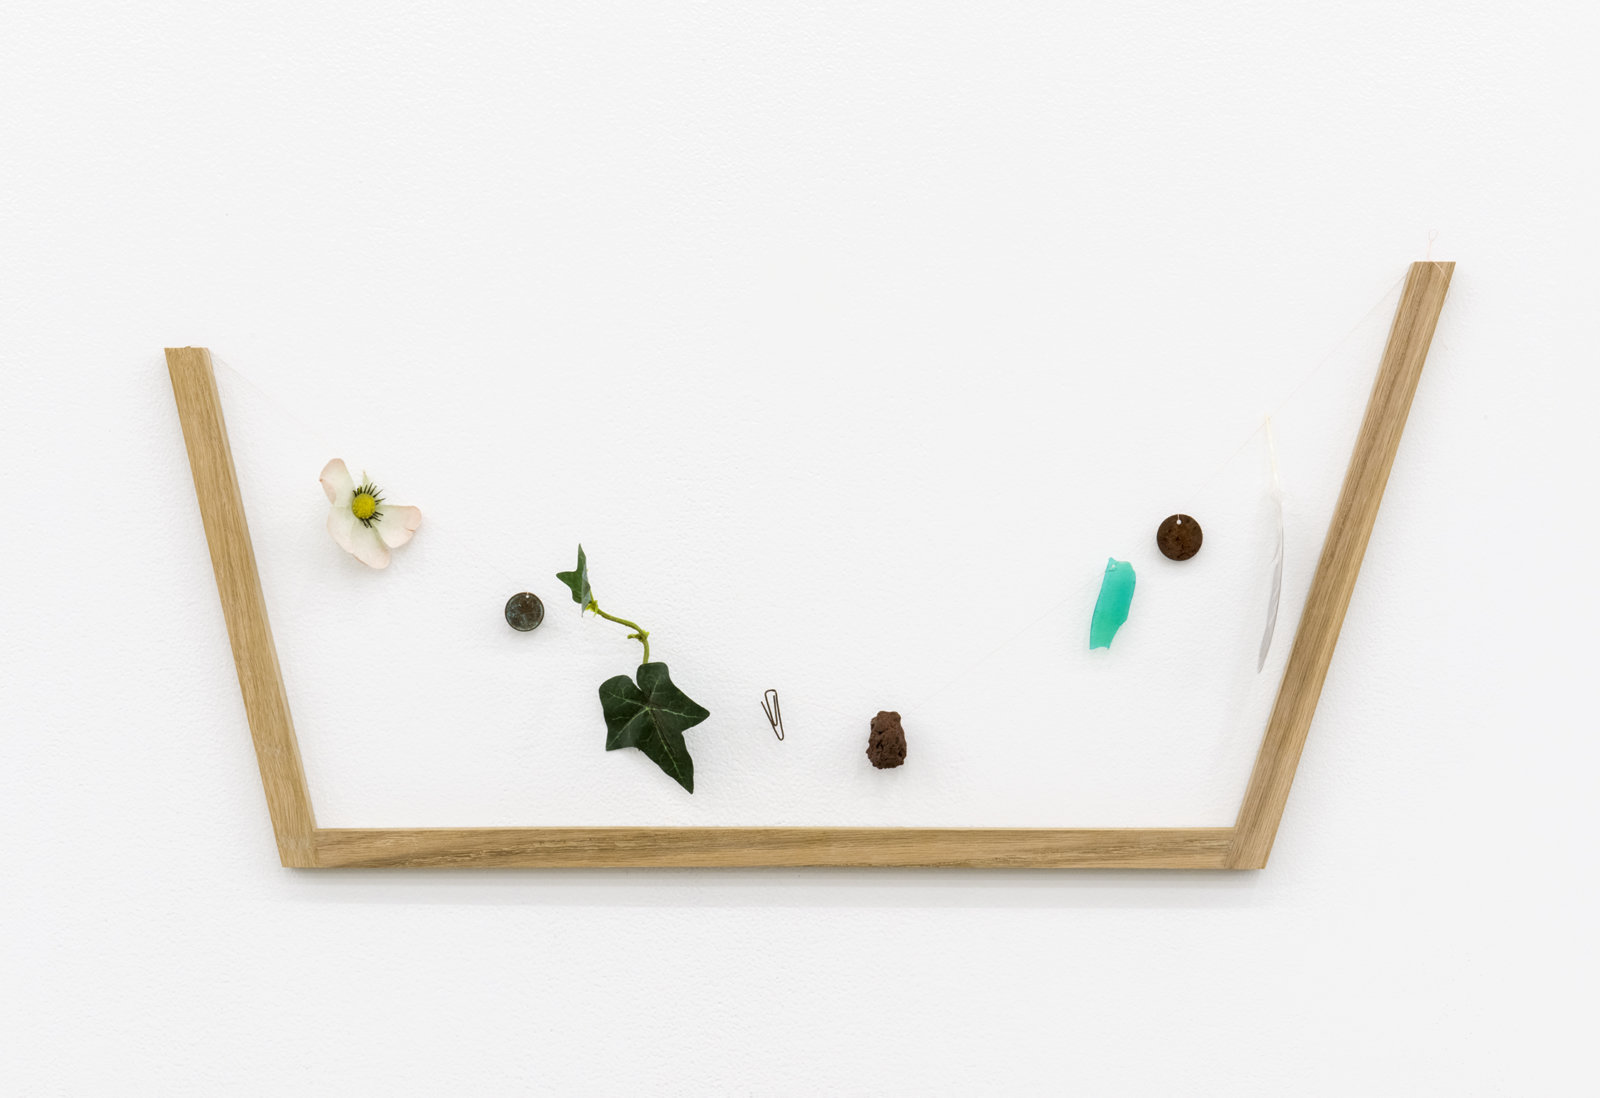 Ashes Withyman, Reminder (Anesidora), 2017, found materials, thread, wood, 12 x 24 x 1 in. (29 x 62 x 3 cm)